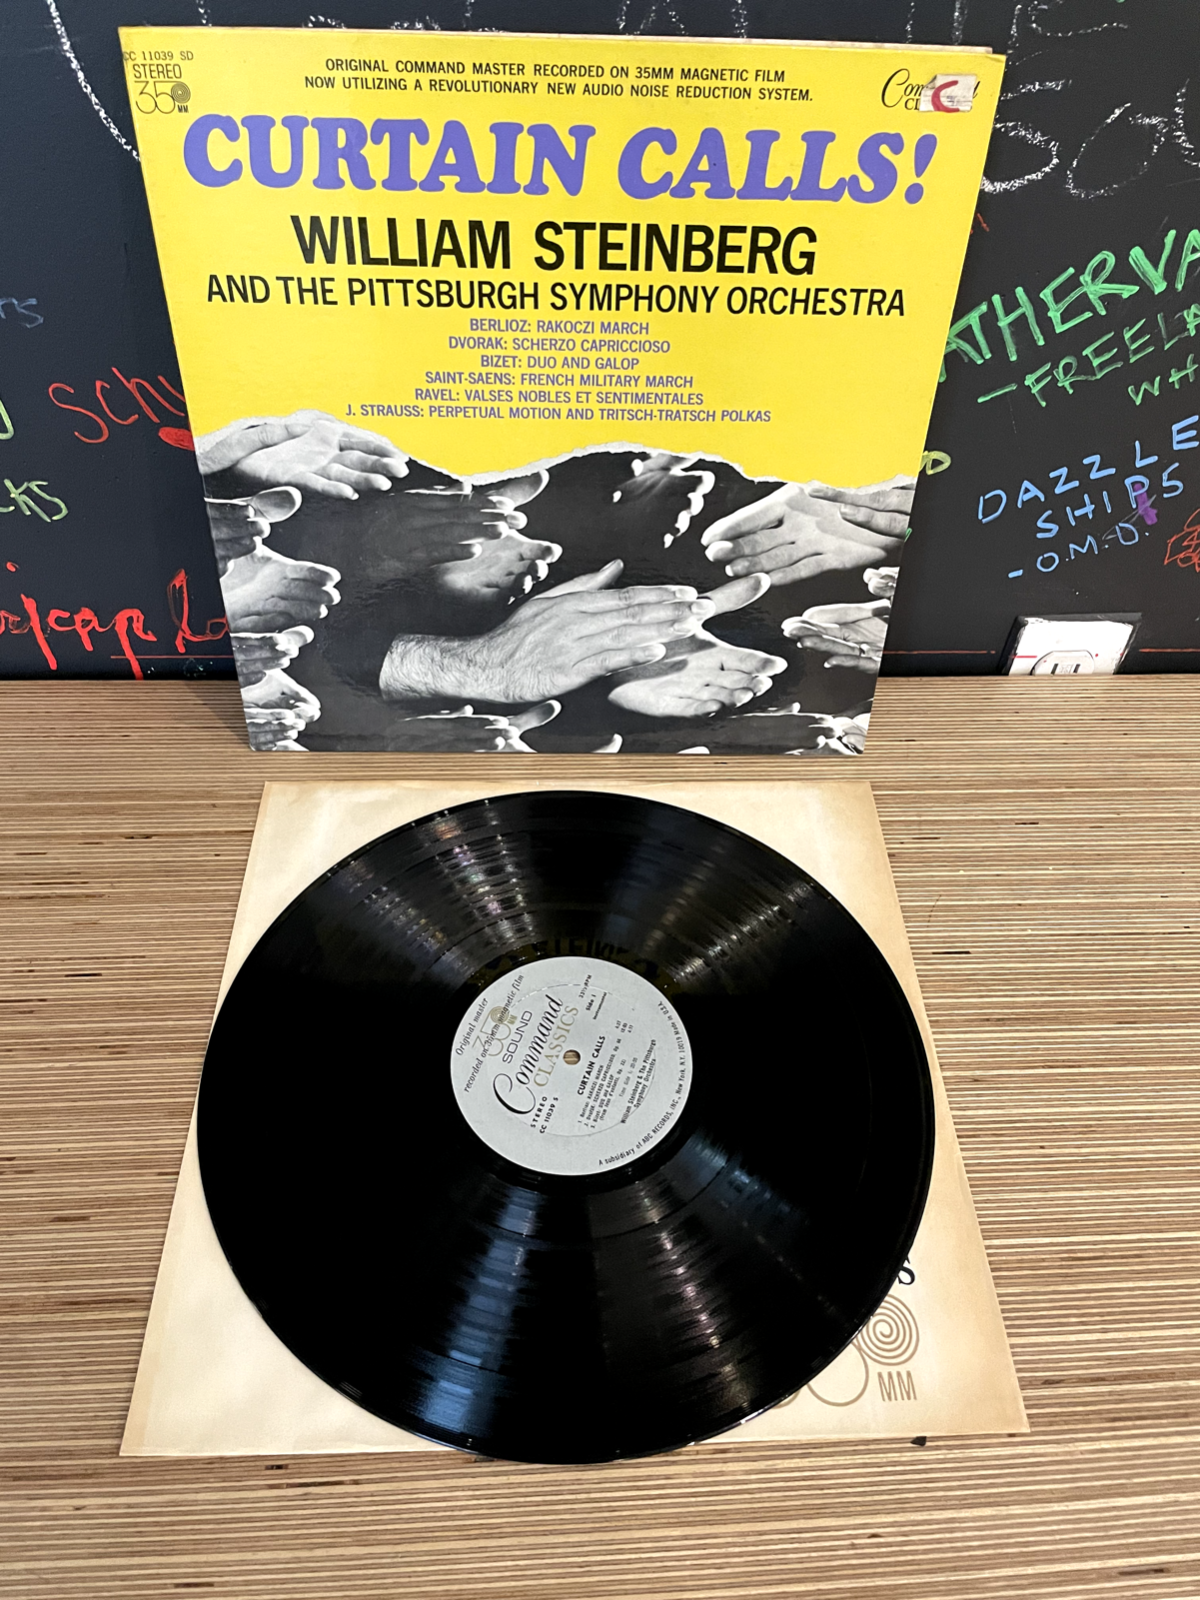 William Steinberg & The Pittsburgh Symphony Orchestra - Curtain Calls! CC11039